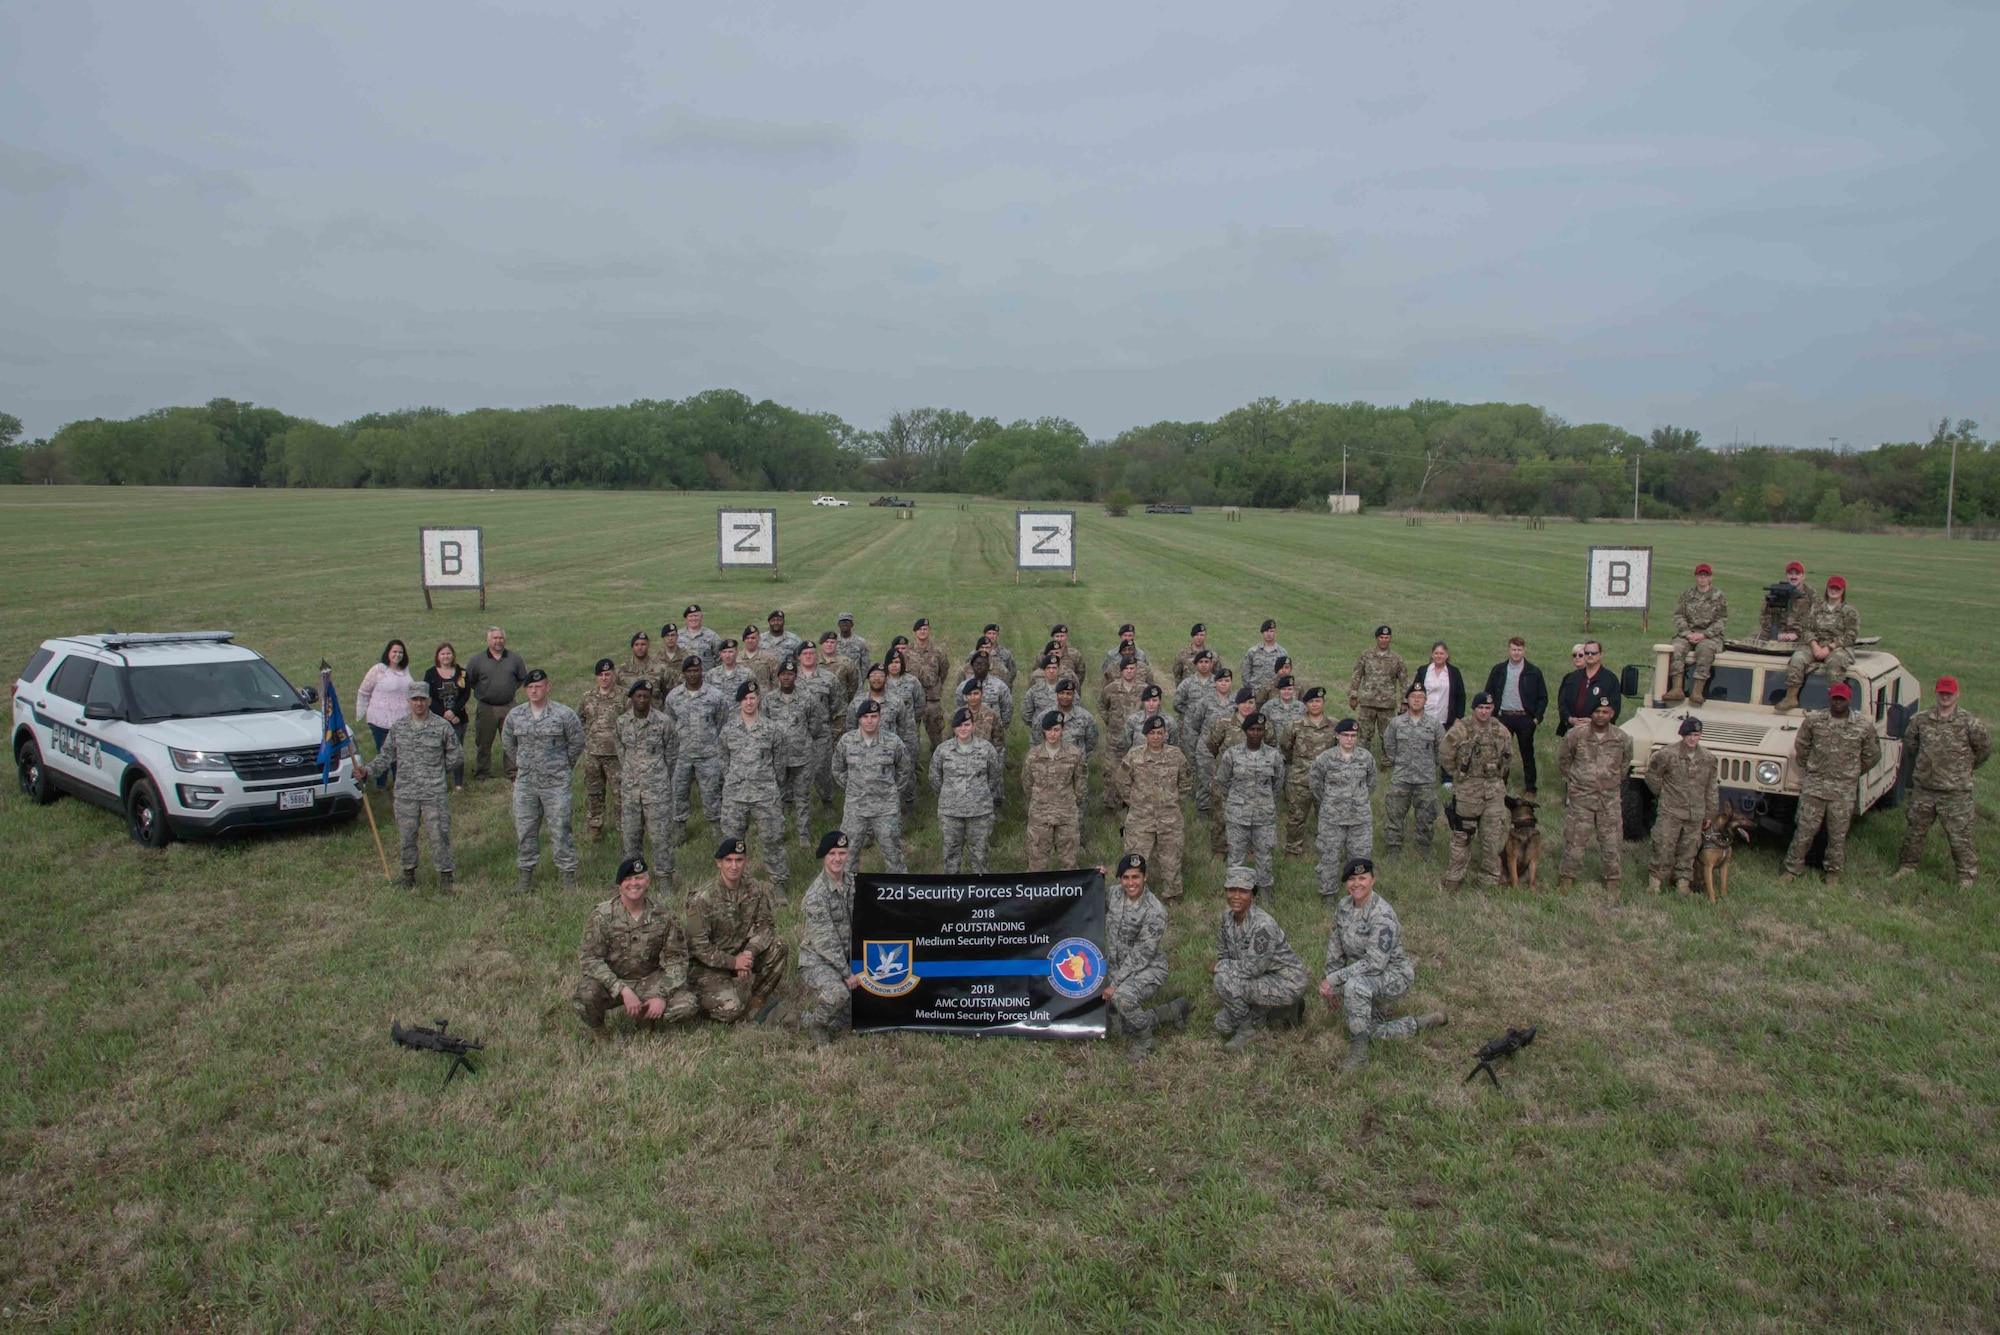 The 22nd Security Forces Squadron poses for a photoApril 24, 2019, at McConnell Air Force Base, Kan. The 22nd SFS achieved the Best Medium Unit Award in not only the Air Mobility Command, but also the Air Force. (U.S. Air Force photo by Airman 1st Class Alan Ricker)